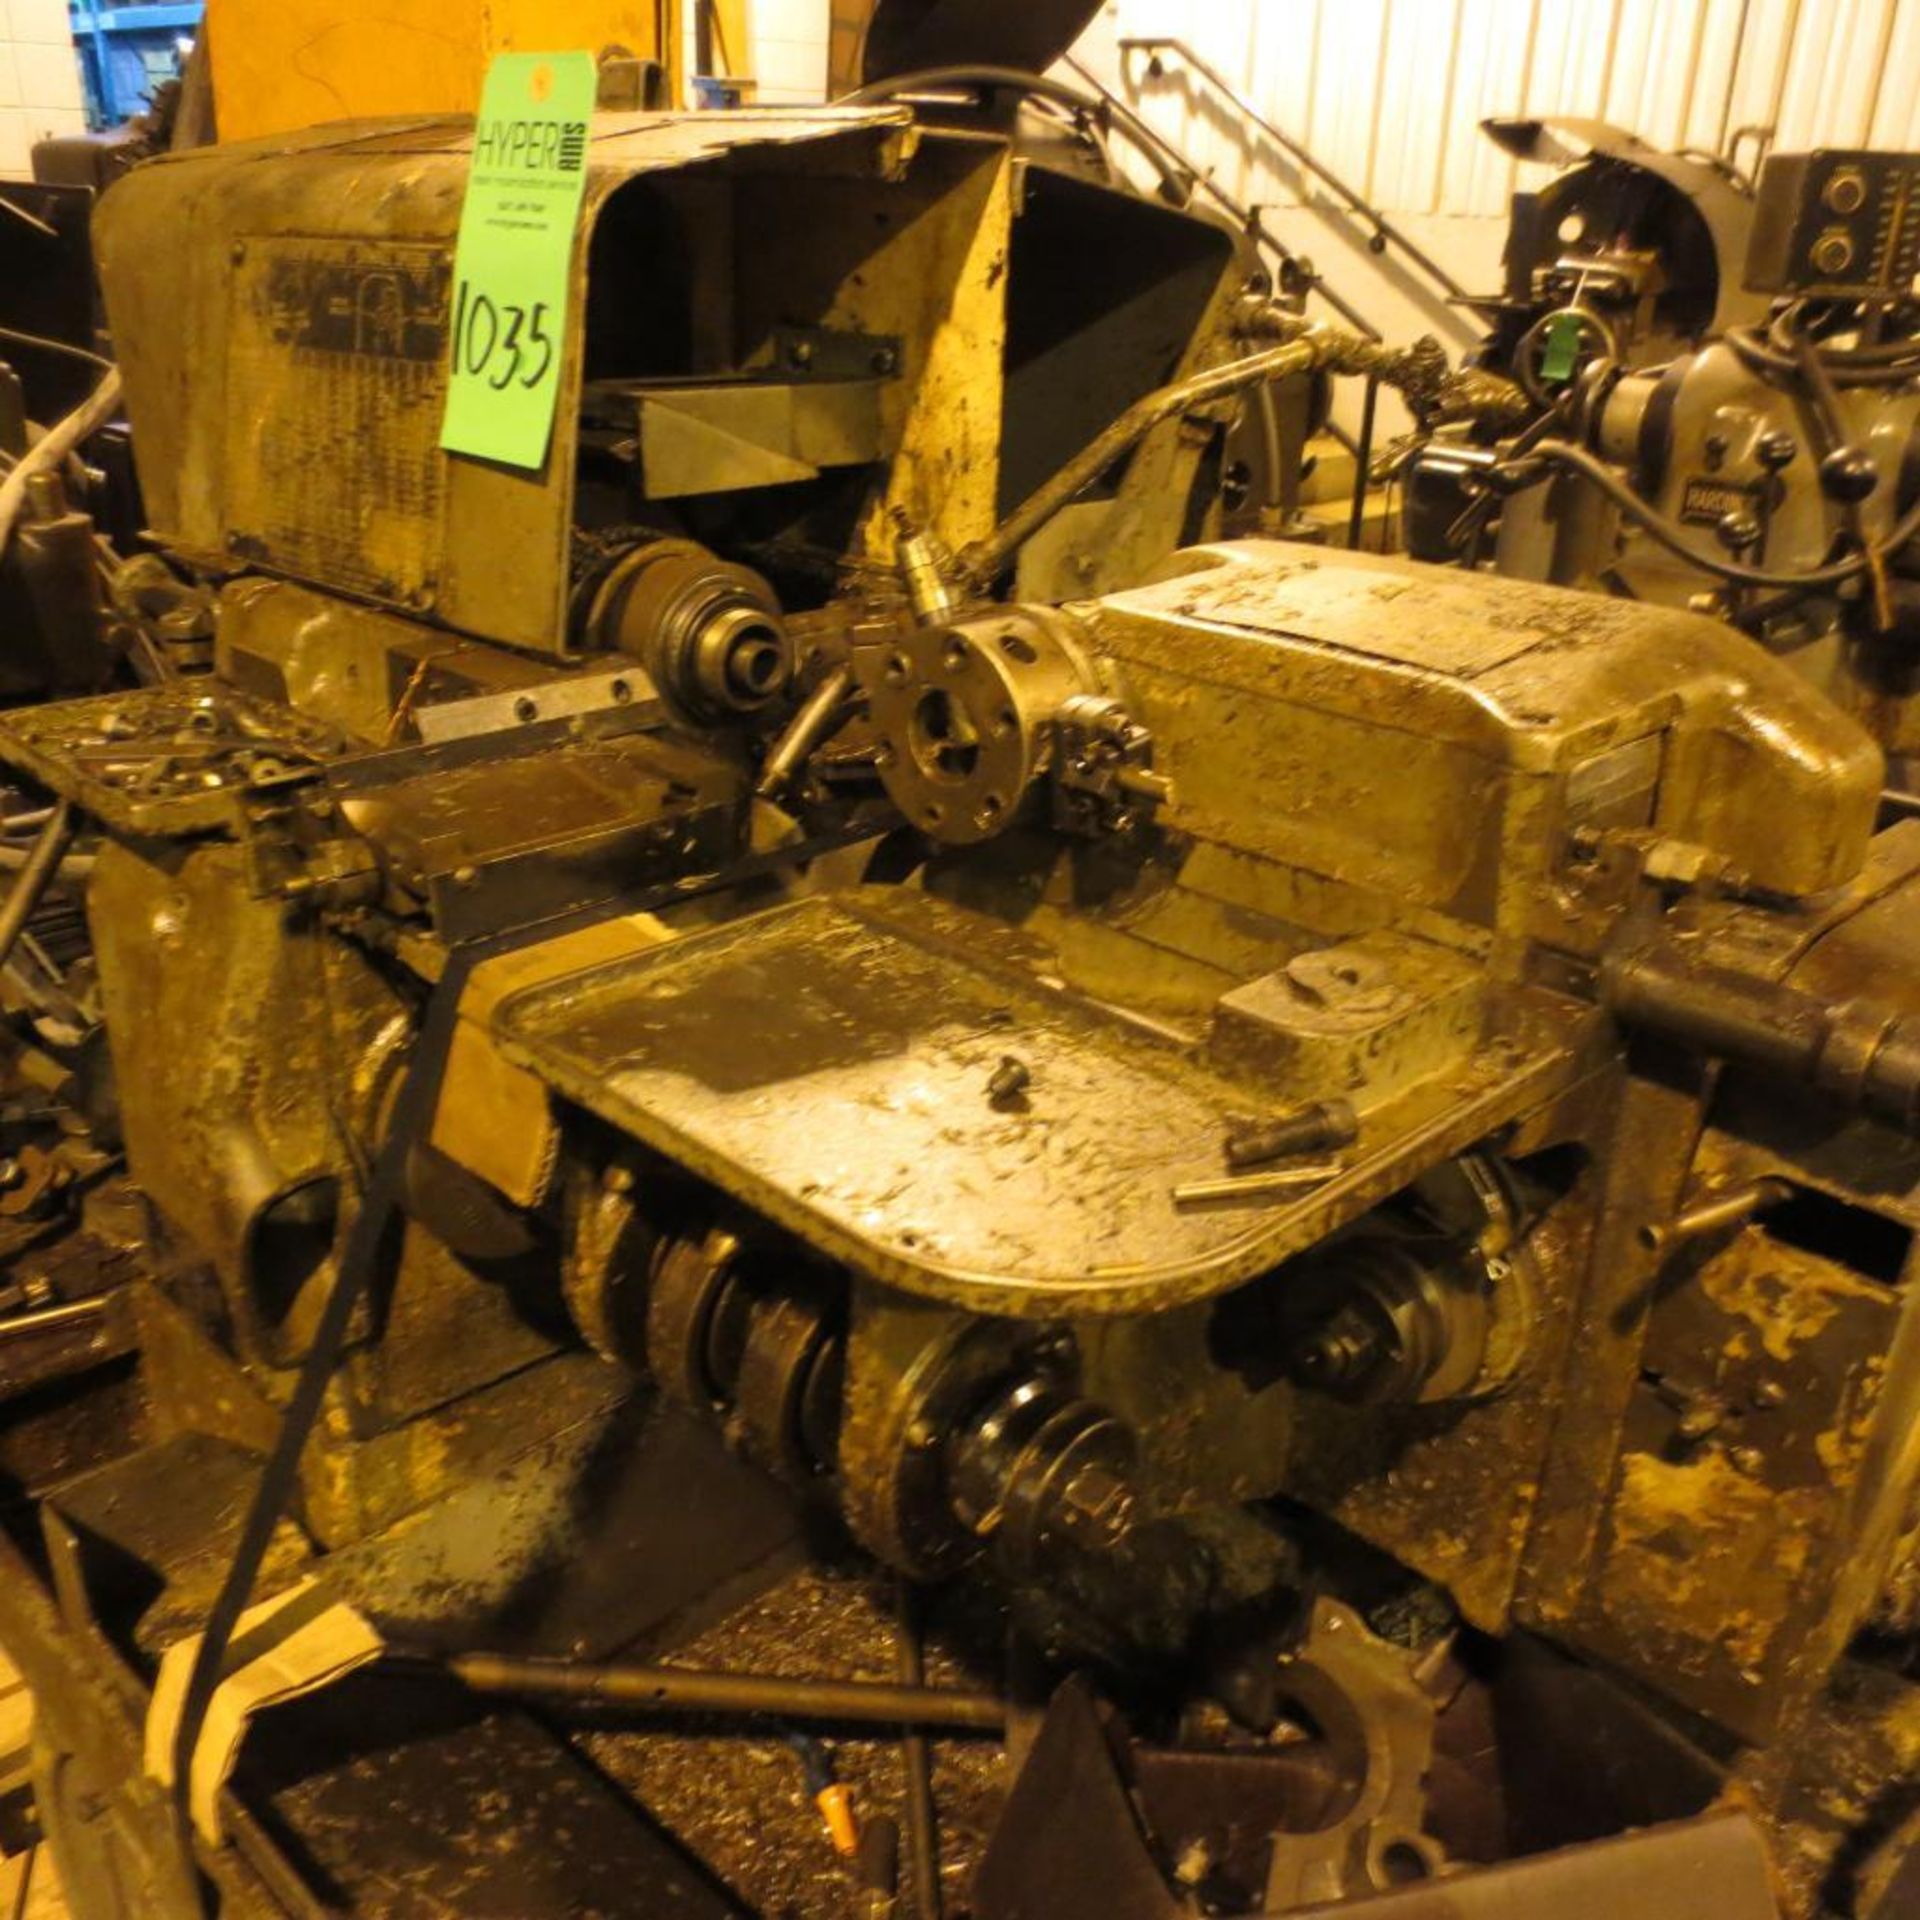 Brown & Sharpe 1/2" No. 00 Single Spindle Automatic Screw Machine S/N 542-00-4276, Push Button, Squa - Image 2 of 4